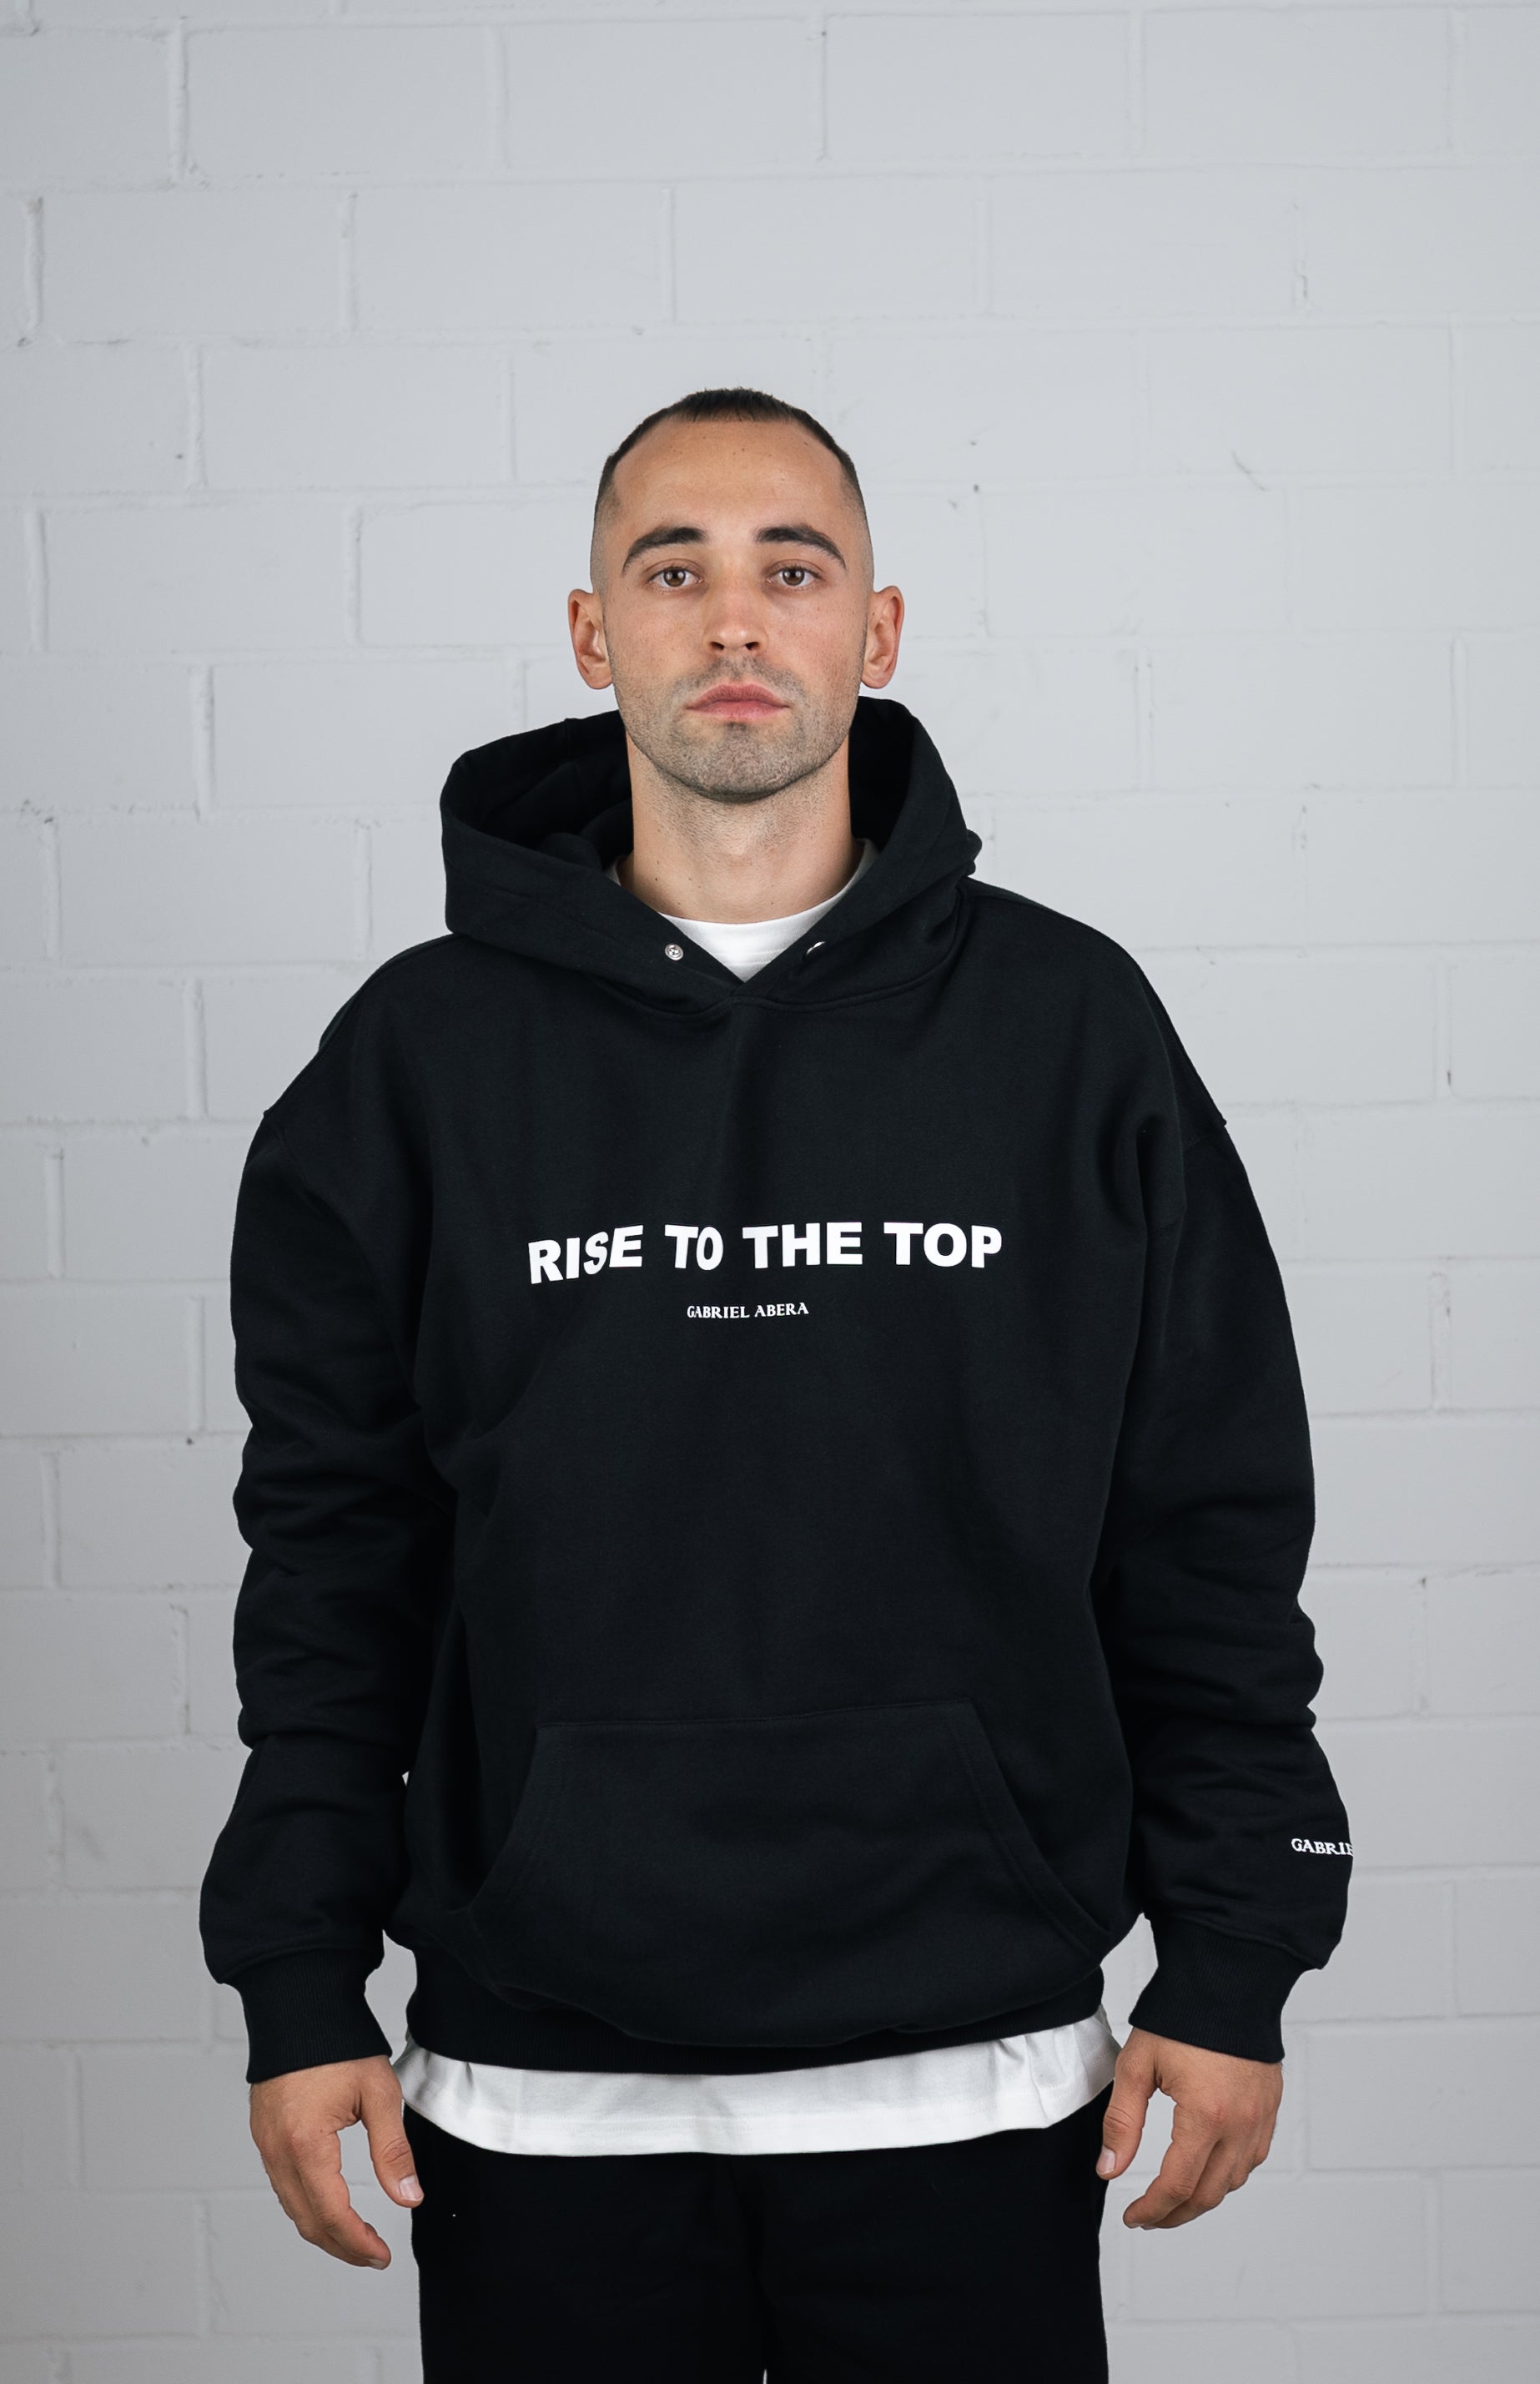 Front View Black Hoodie worn by male model